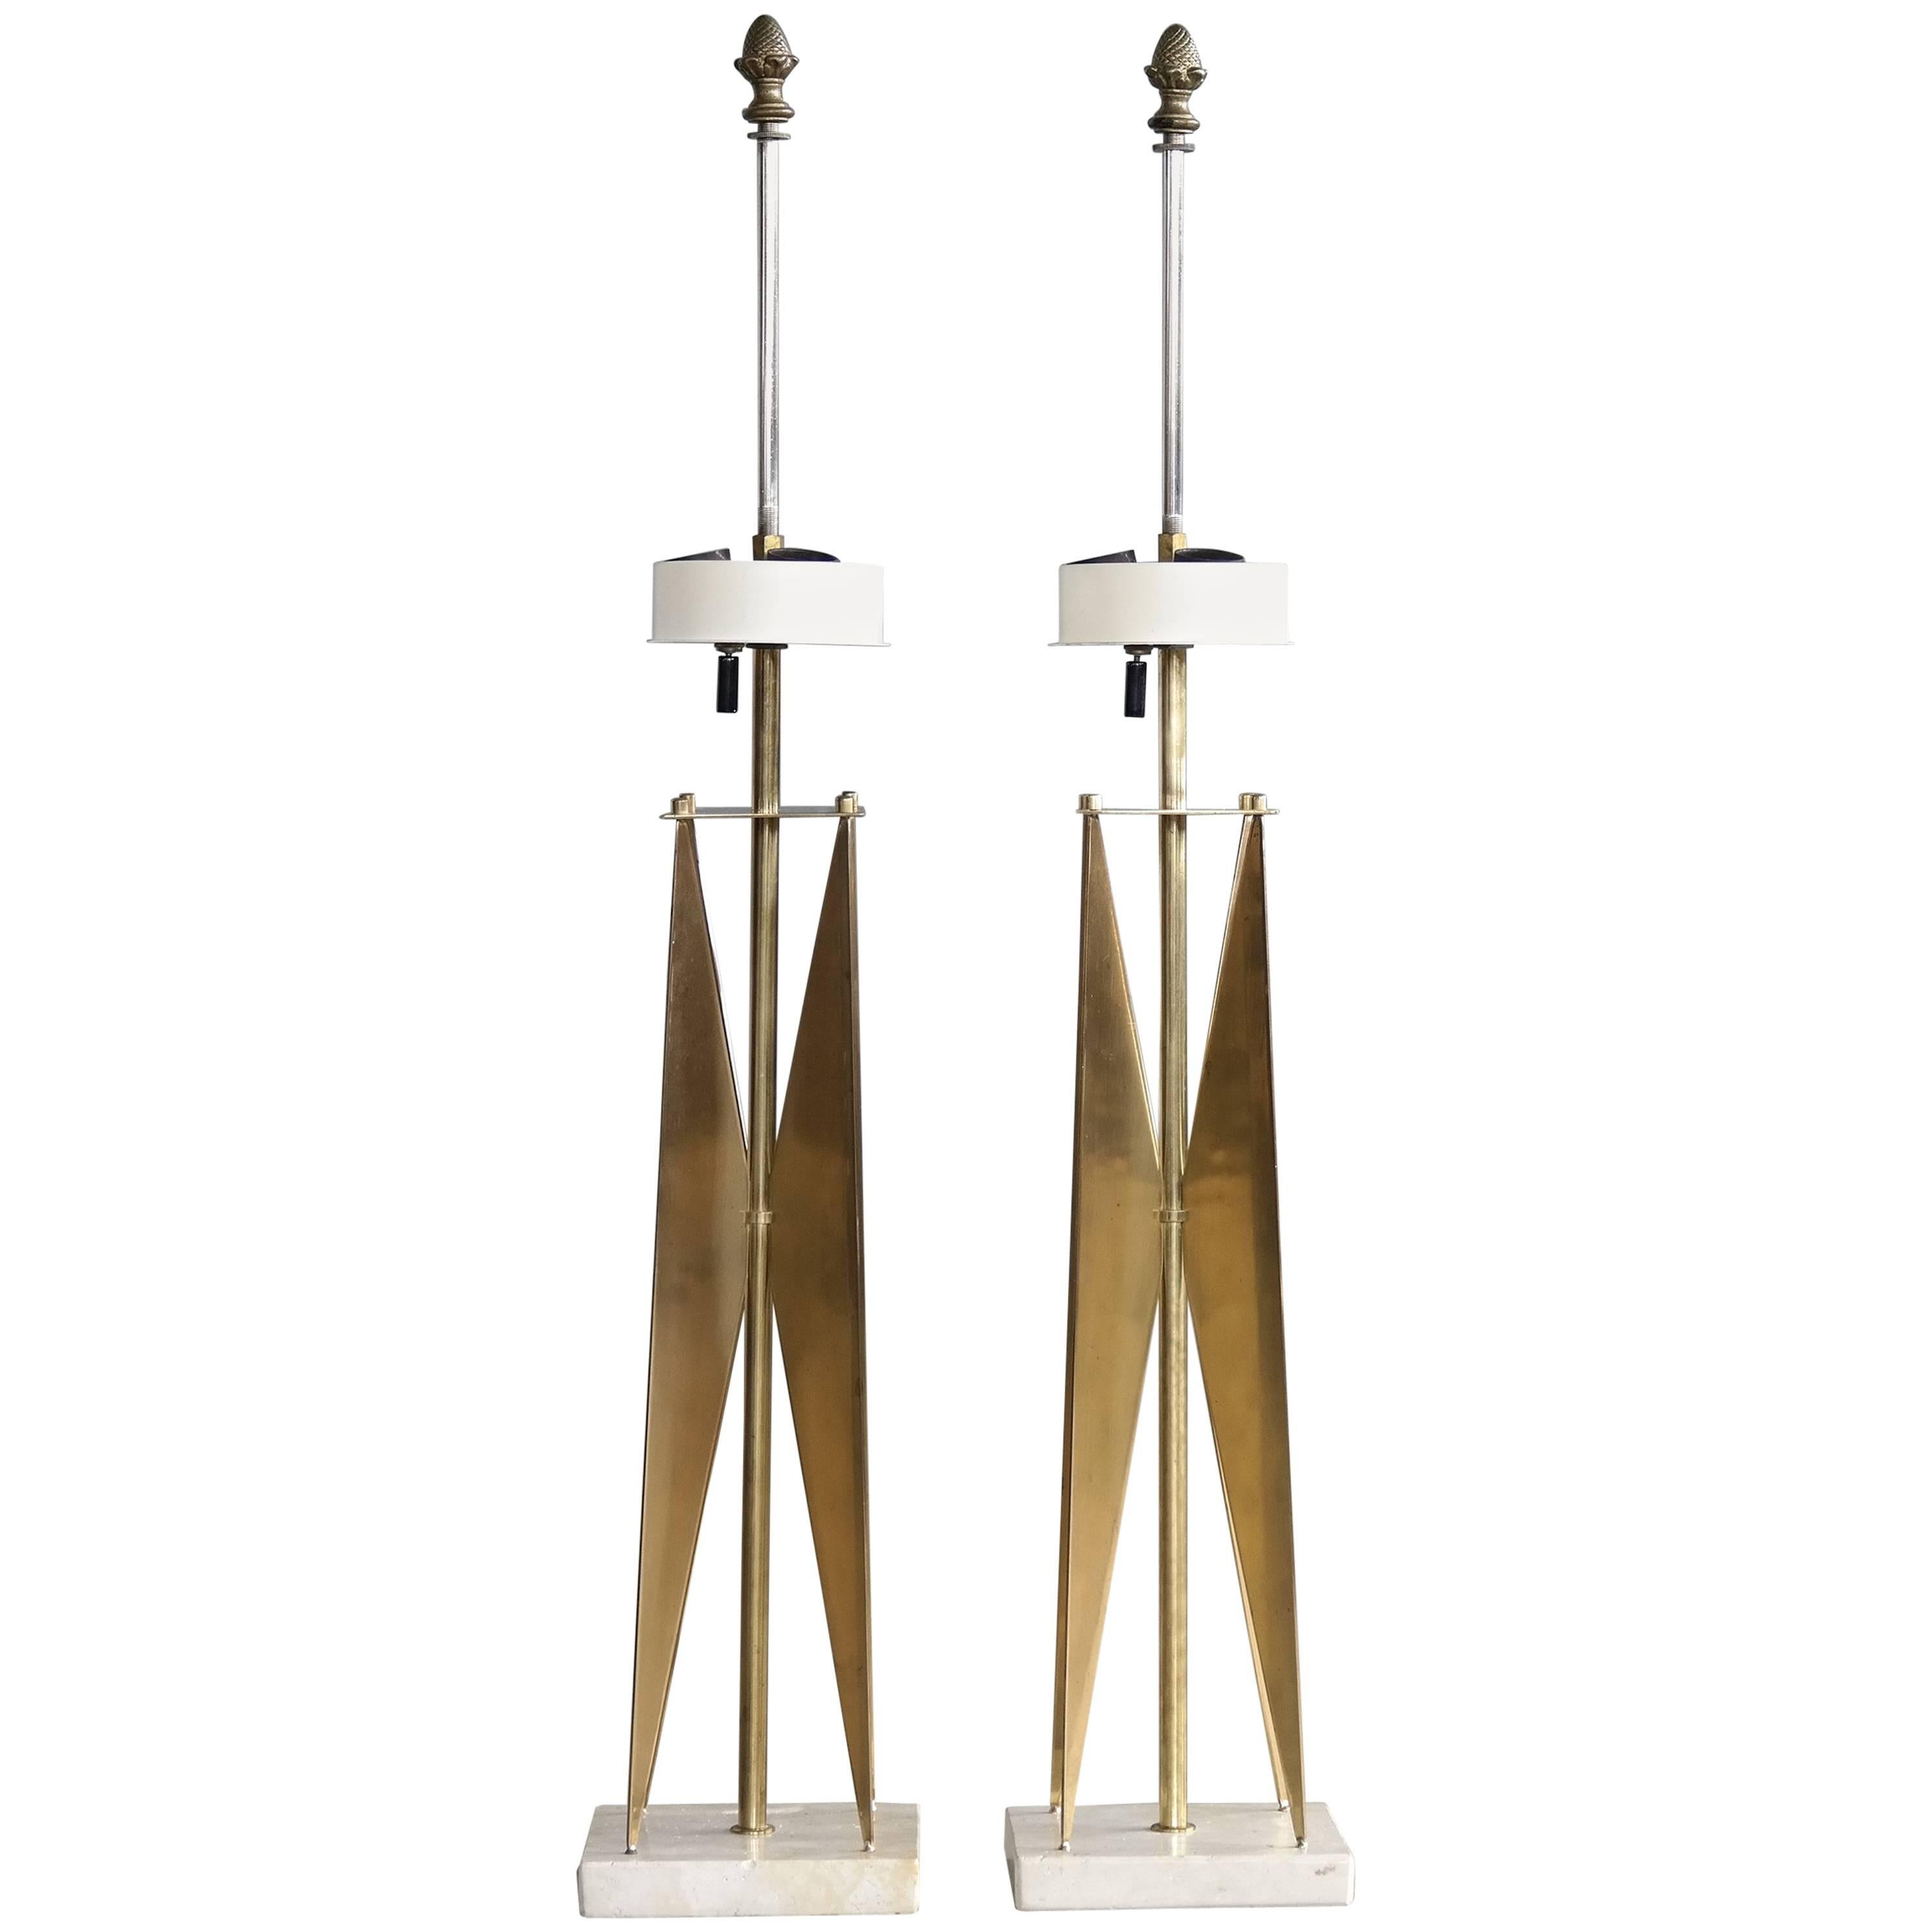 Pair of 1950s Gerald Thurston Sculptural Brass Table Lamps for Lightolier